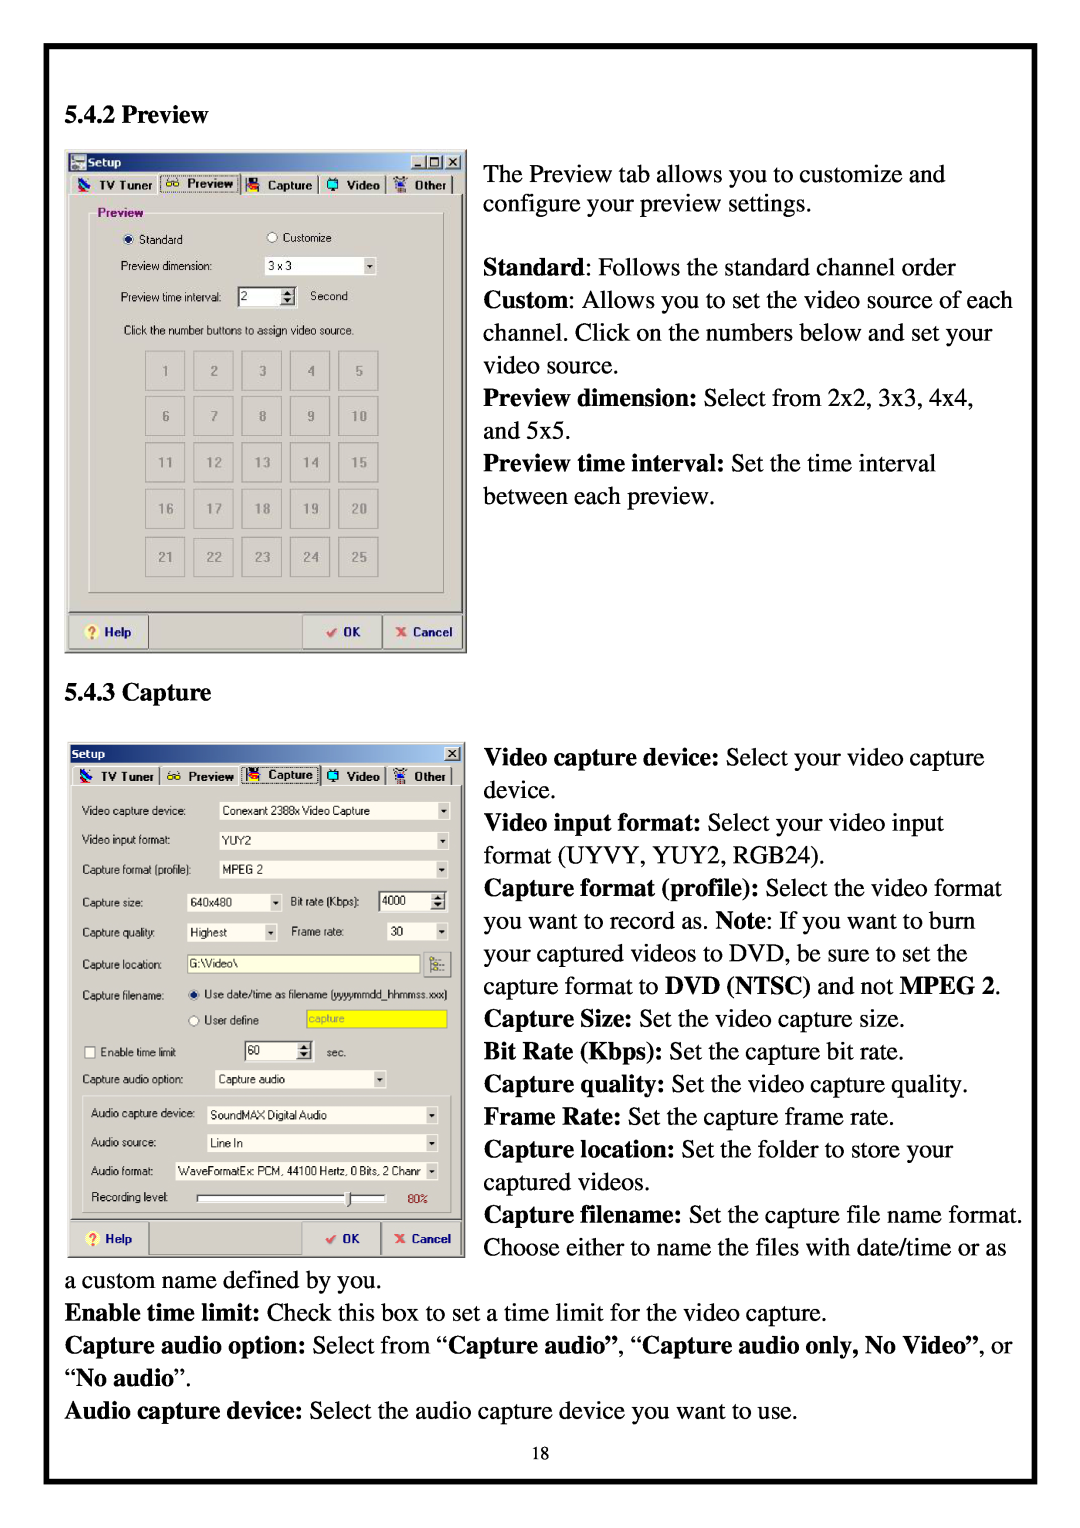 Airlink101 ATVUSB05 manual Preview, Capture format profile Select the video format 